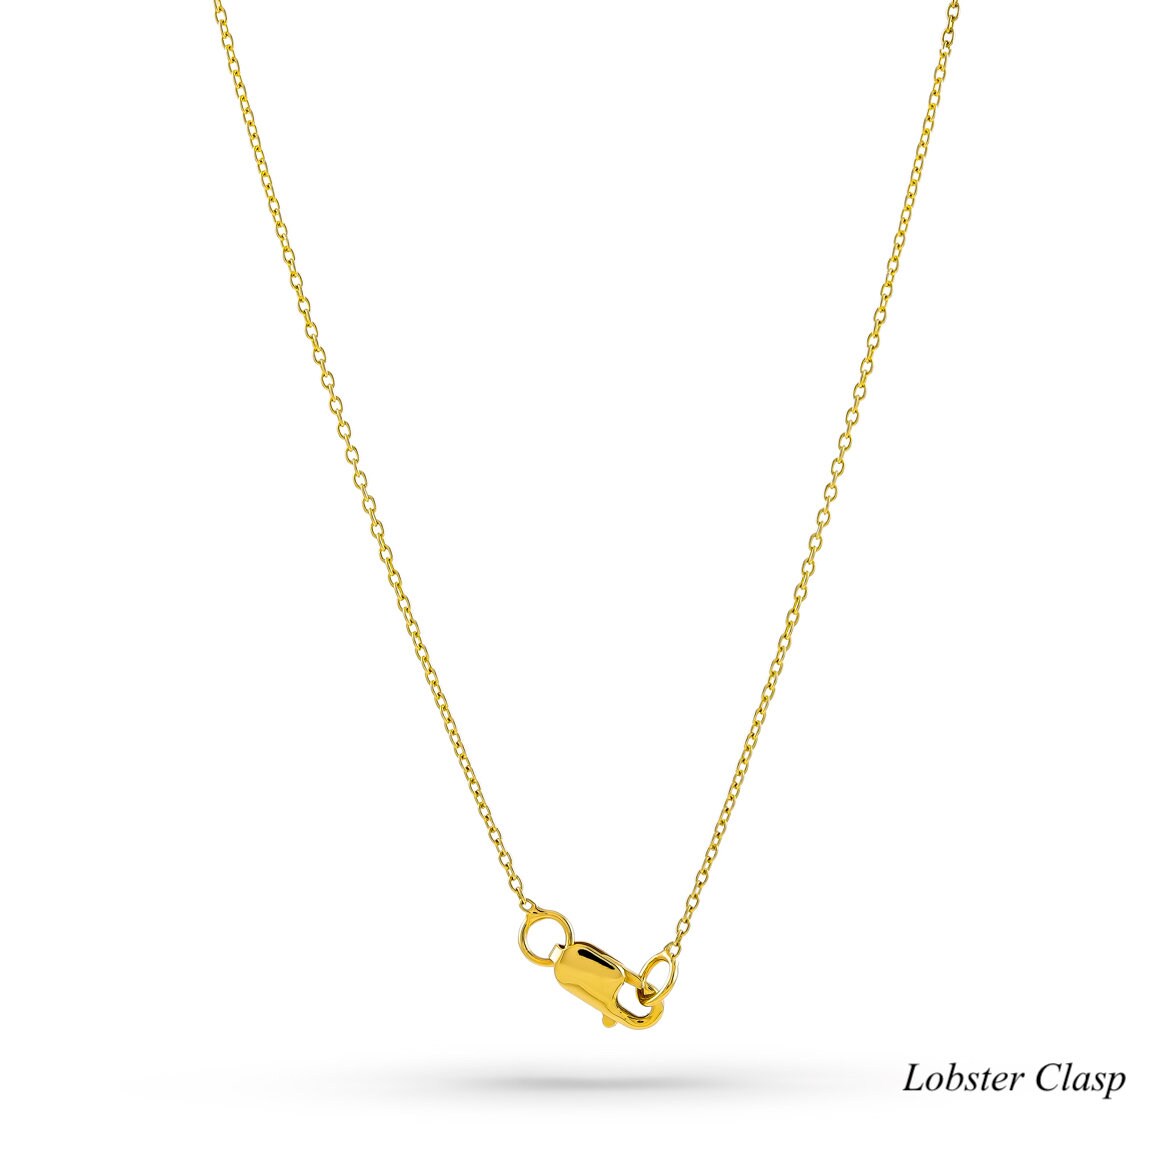 Heart Lariat Necklace in 14K Gold